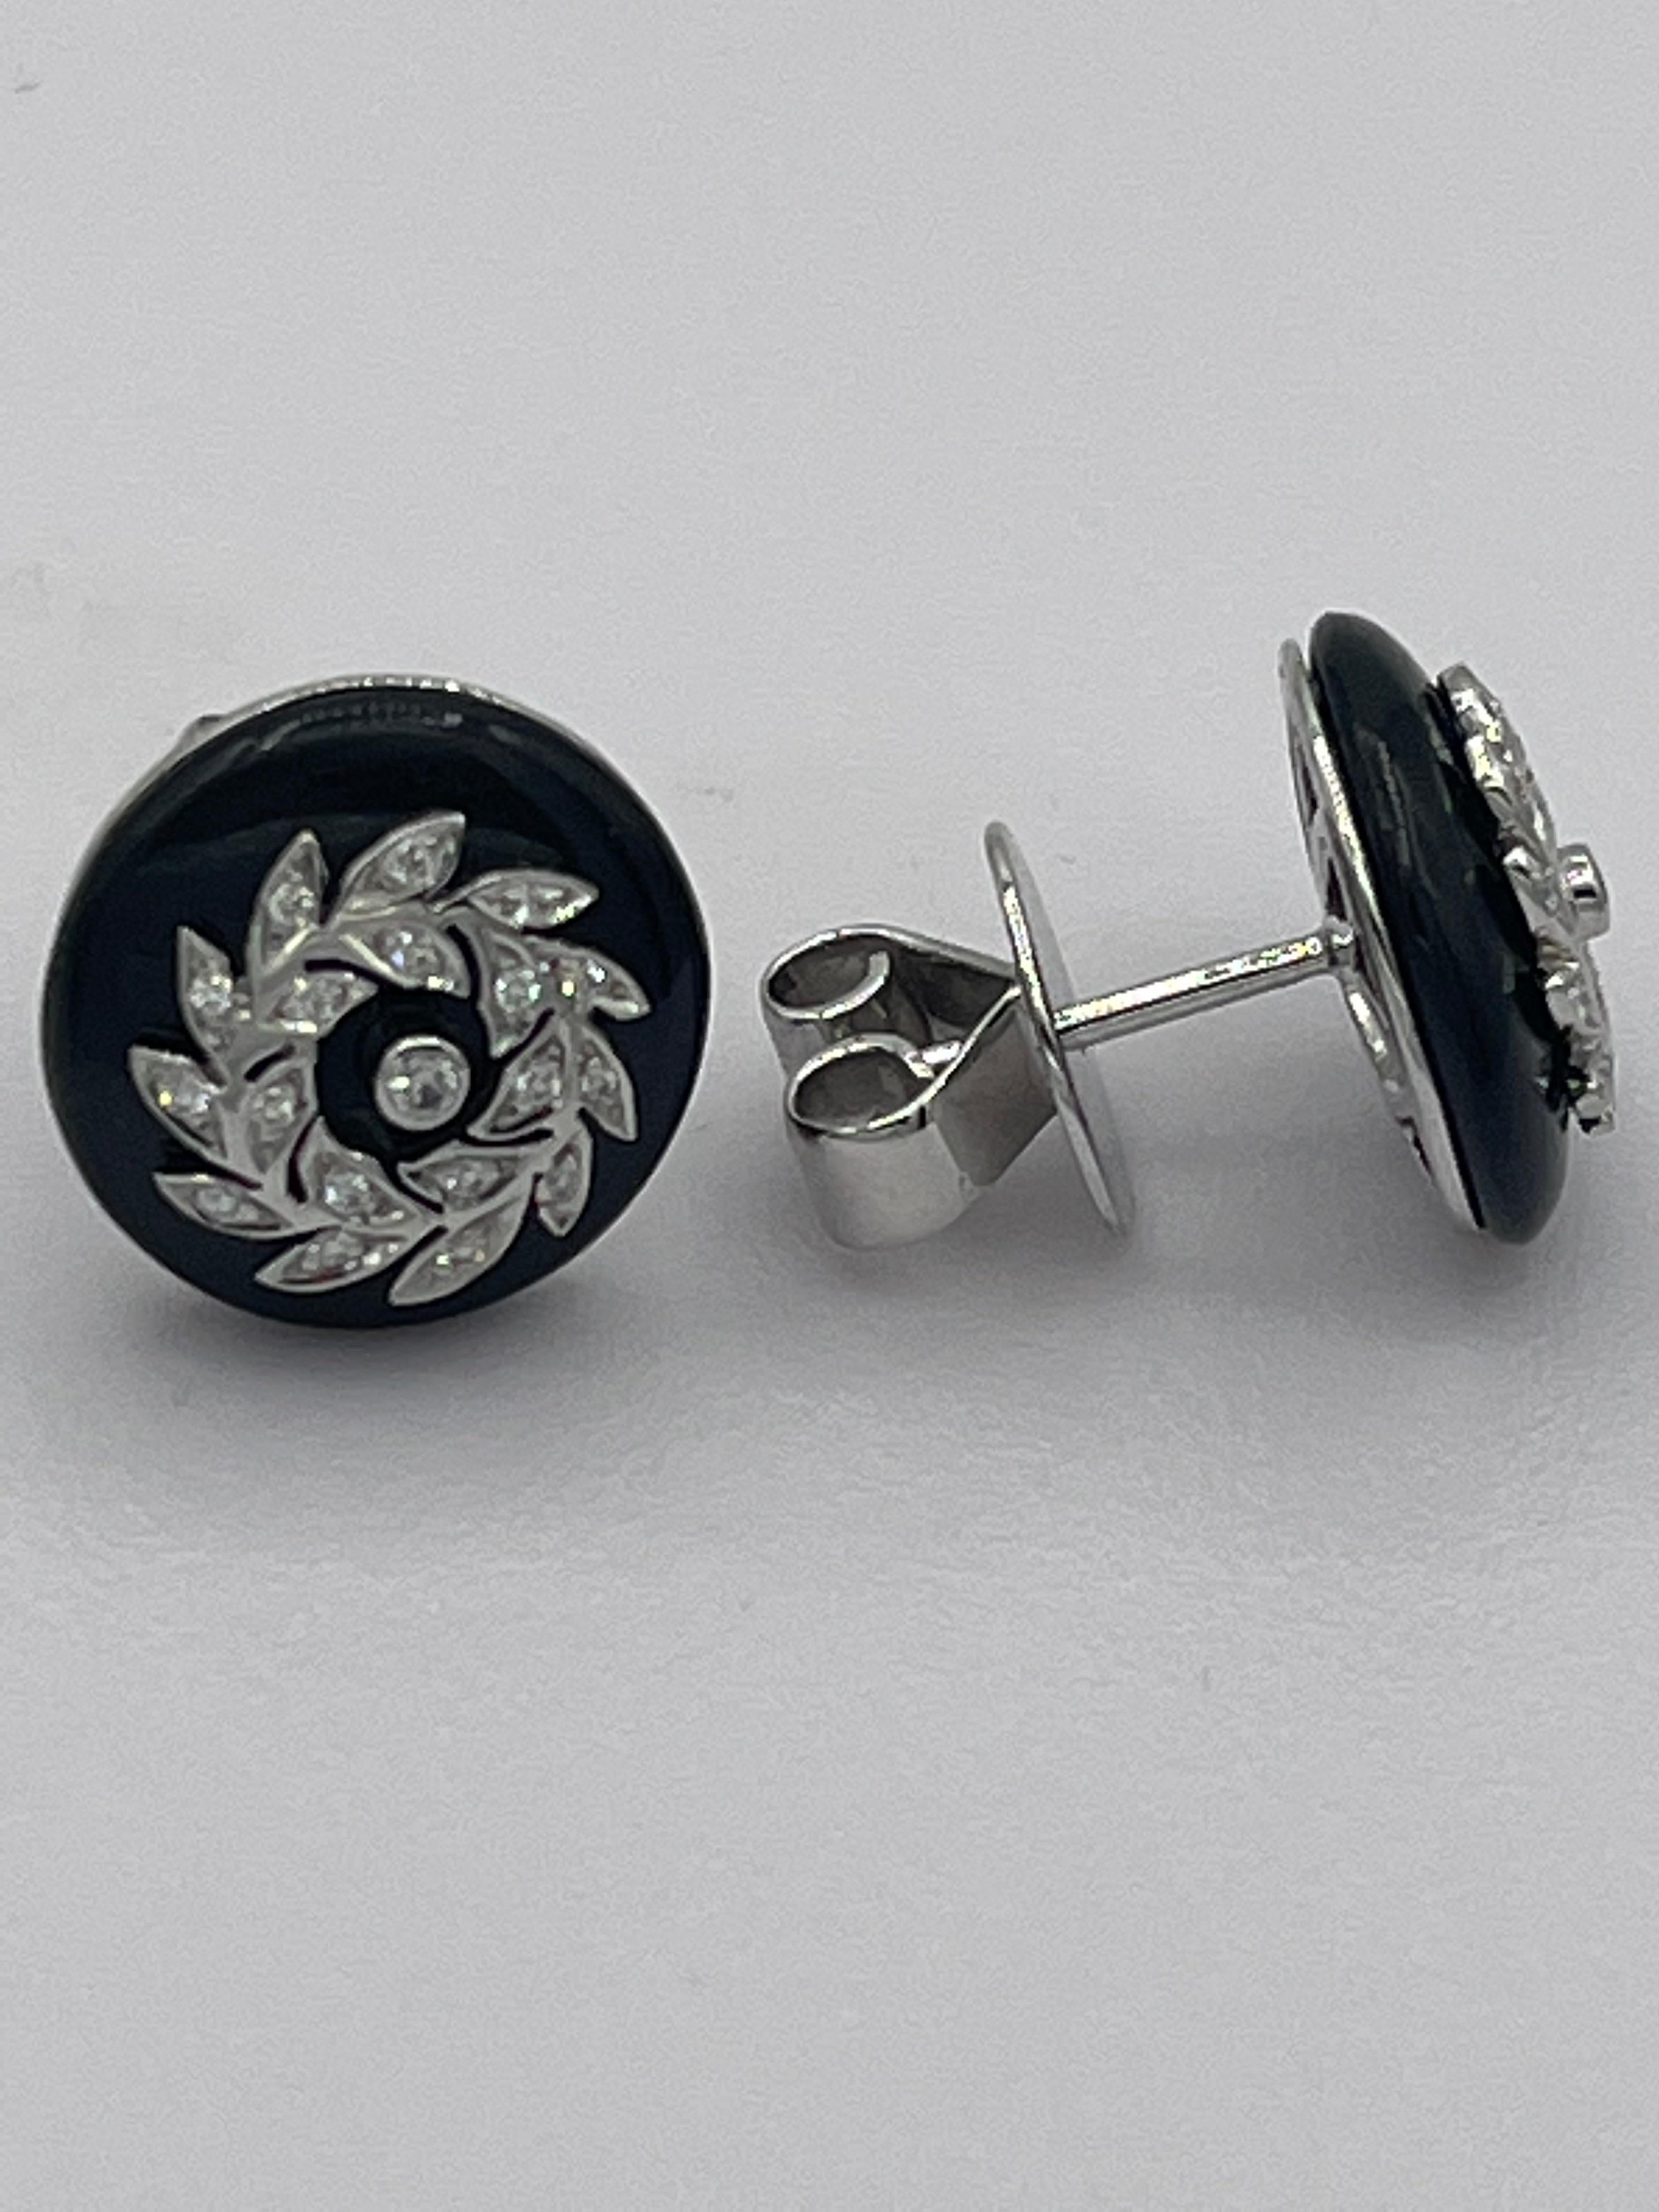 14 k white gold
Onyx
0,10 ct diamond
6,9 gram
diameter 12 mm

This earrings are for everyday and all ages